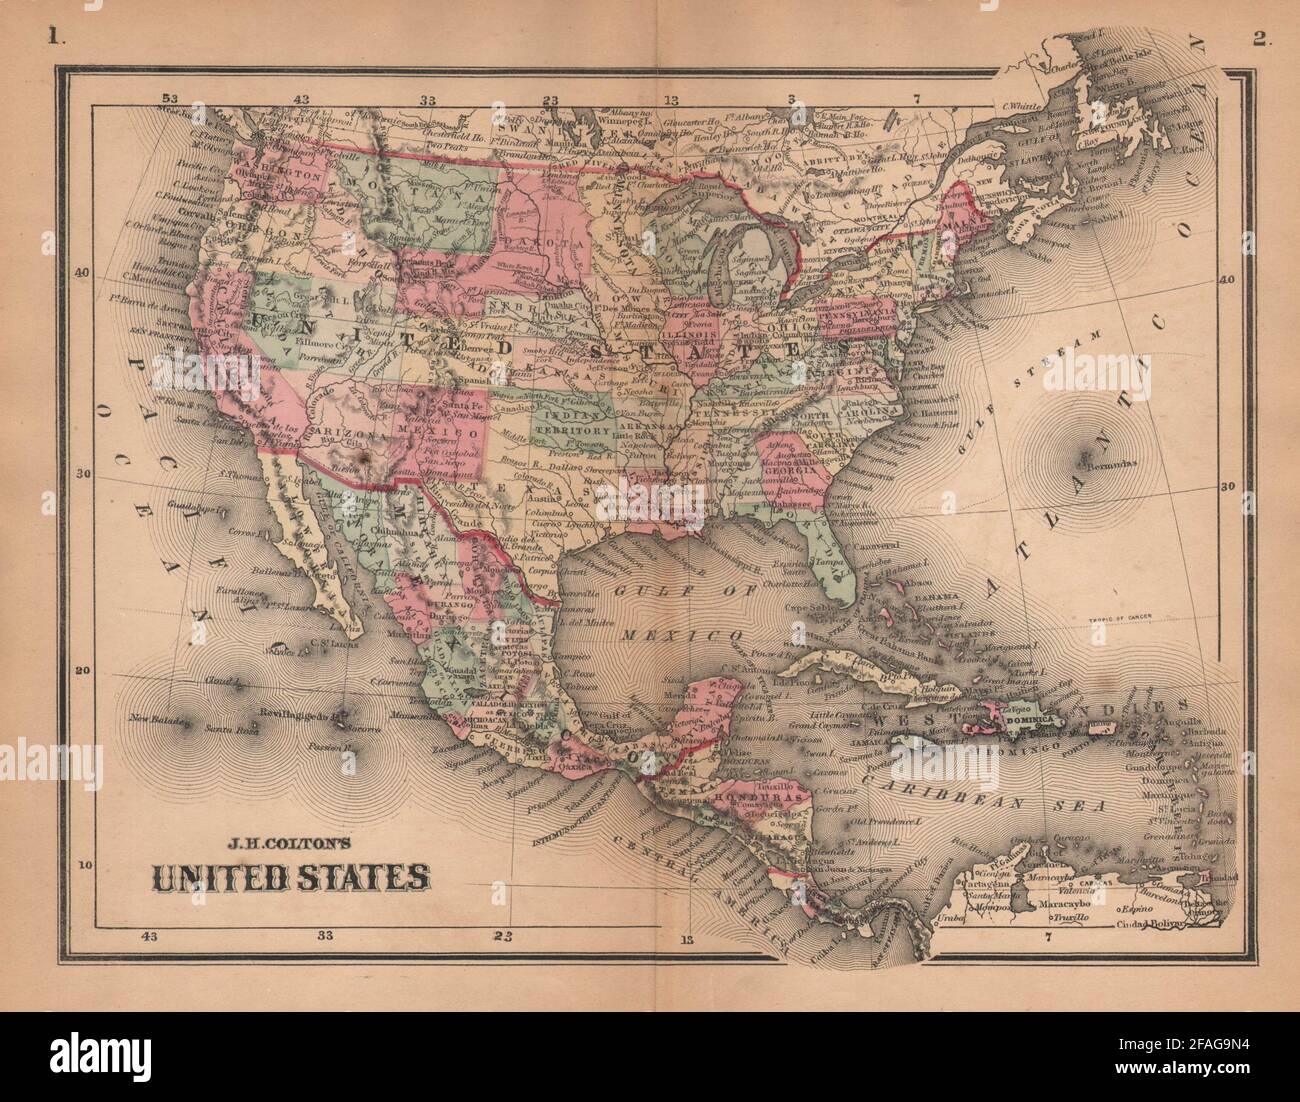 J. H. Colton's United States. Wyoming attached to Dakota 1864 old antique map Stock Photo